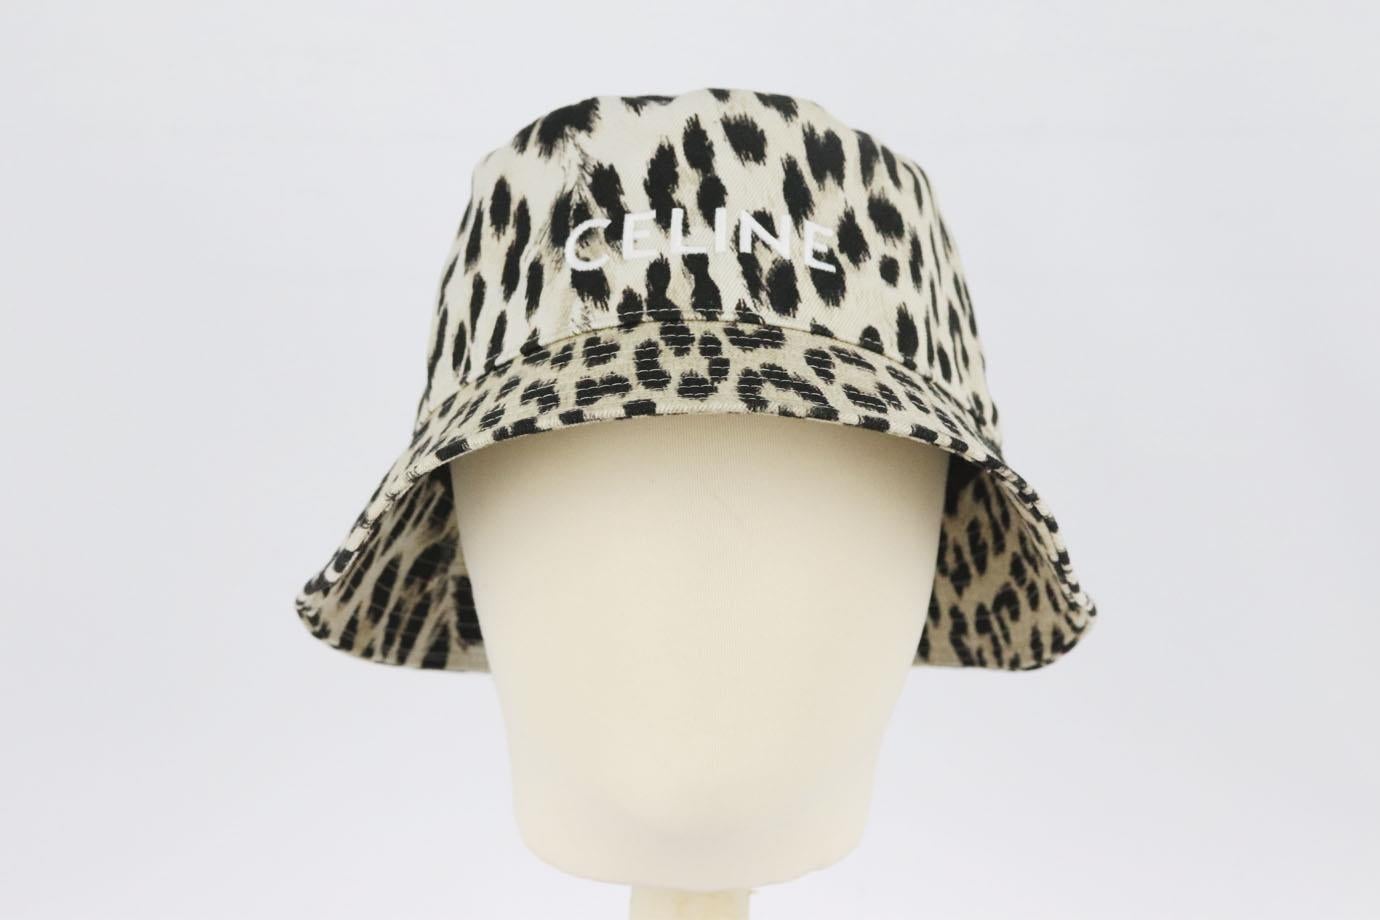 Celine logo embroidered leopard print cotton twill bucket hat. Brown, black and beige. Slips on. 100% Cotton; lining: 65% polyester, 35% cotton. Does not come with dustbag or box. Size: Medium (57 cm). Brim width: 2.2 in Very good condition - As new